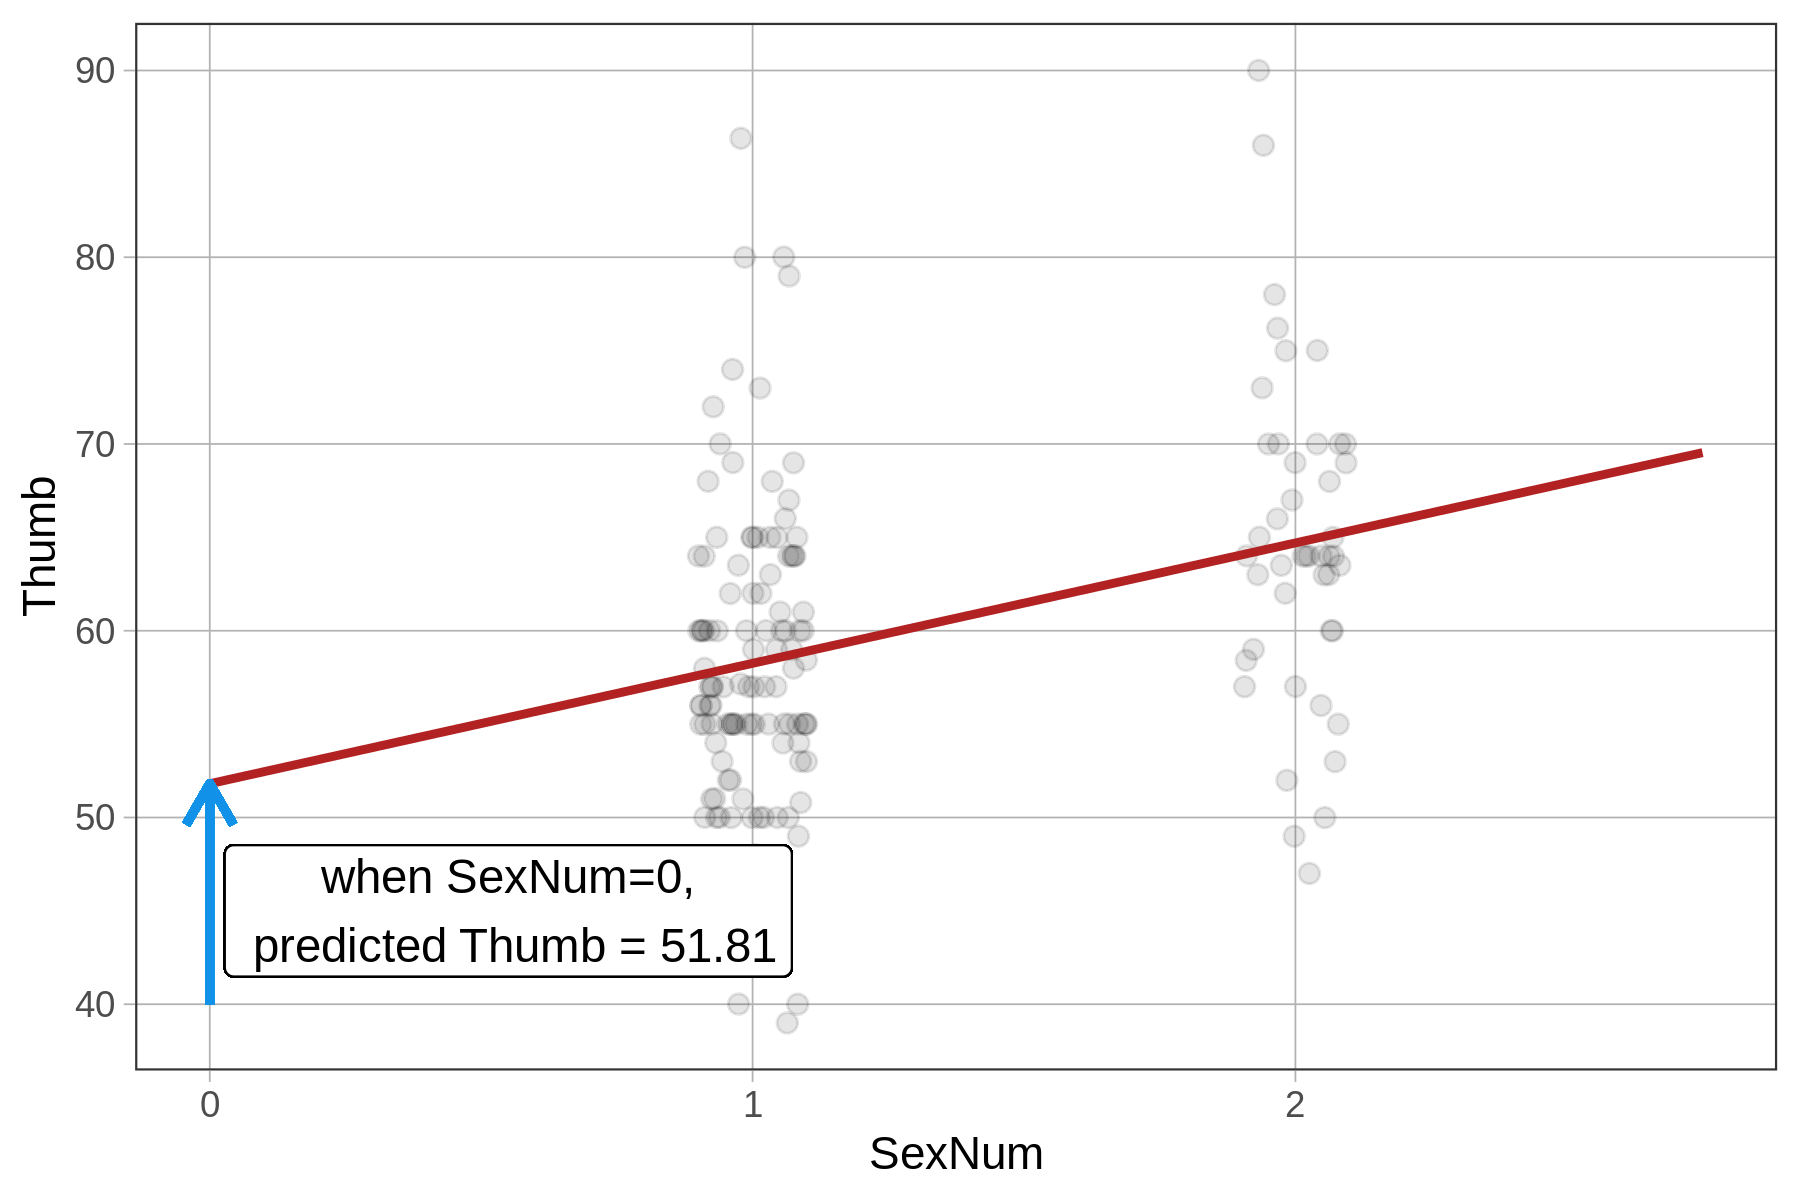 On the right, a representation of b-sub-zero of the SexNum model as a jitter plot of Thumb predicted by Sex (female and male), with the model overlaid as a regression line running through the mean of each group. The point of the regression line nearest to the y-axis, where SexNum equals zero, is labeled to say when SexNum equals zero, predicted Thumb equals 51.81.